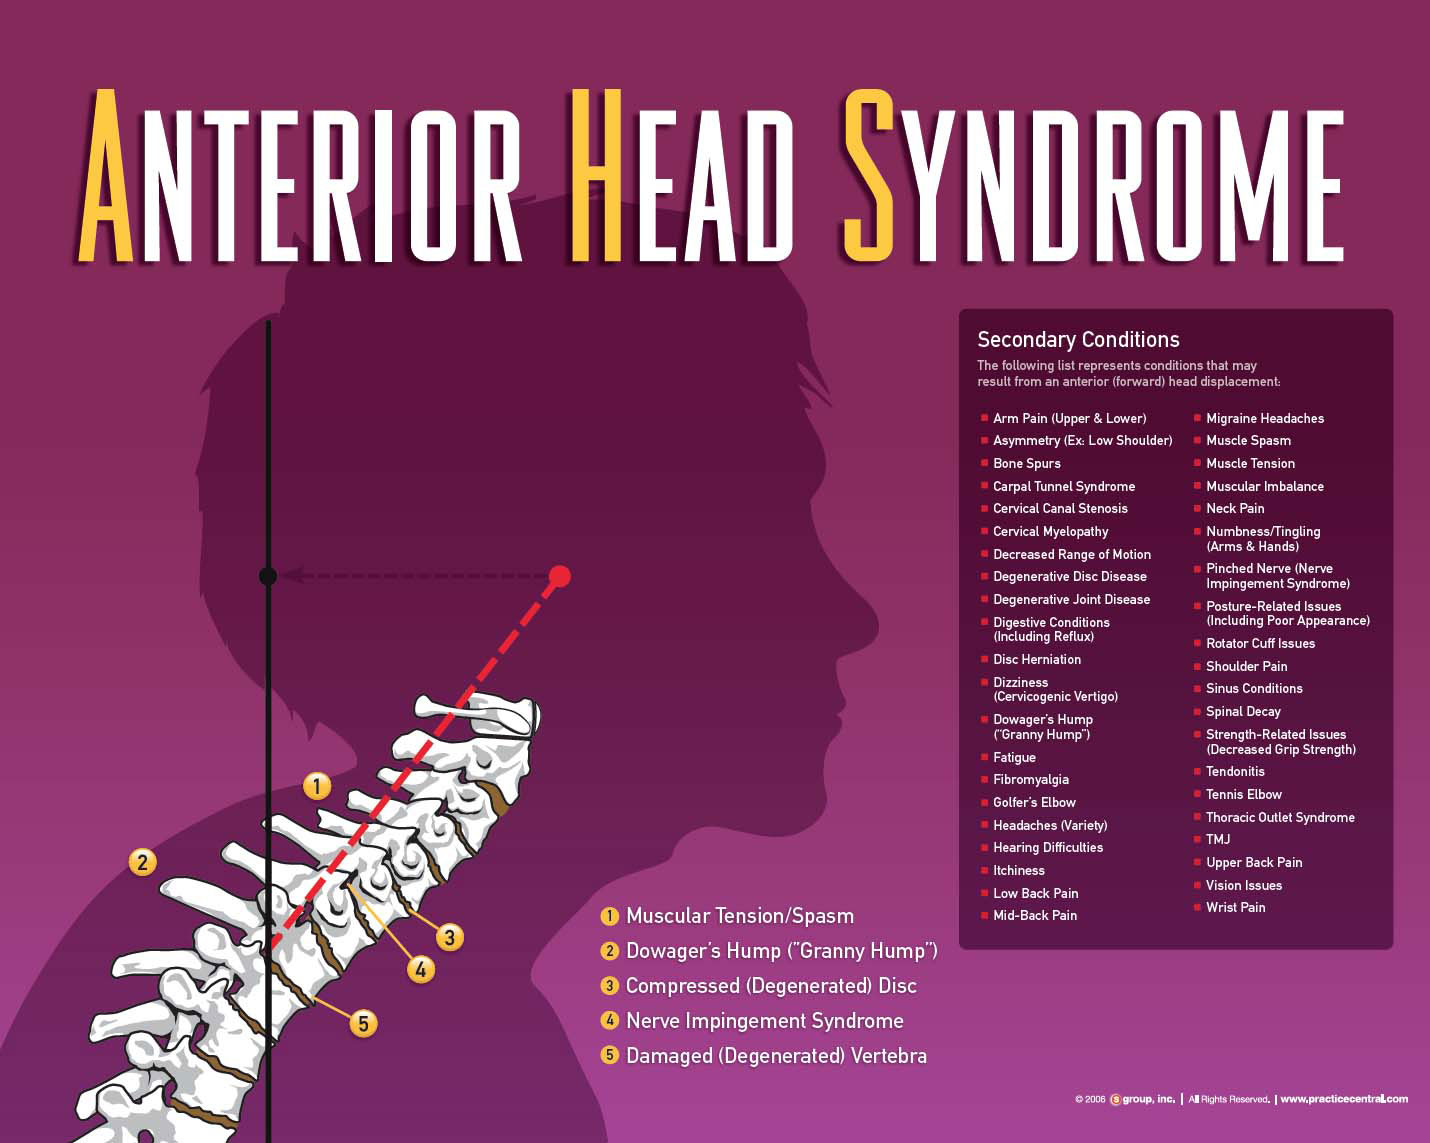 Anterior Head Syndrome facts